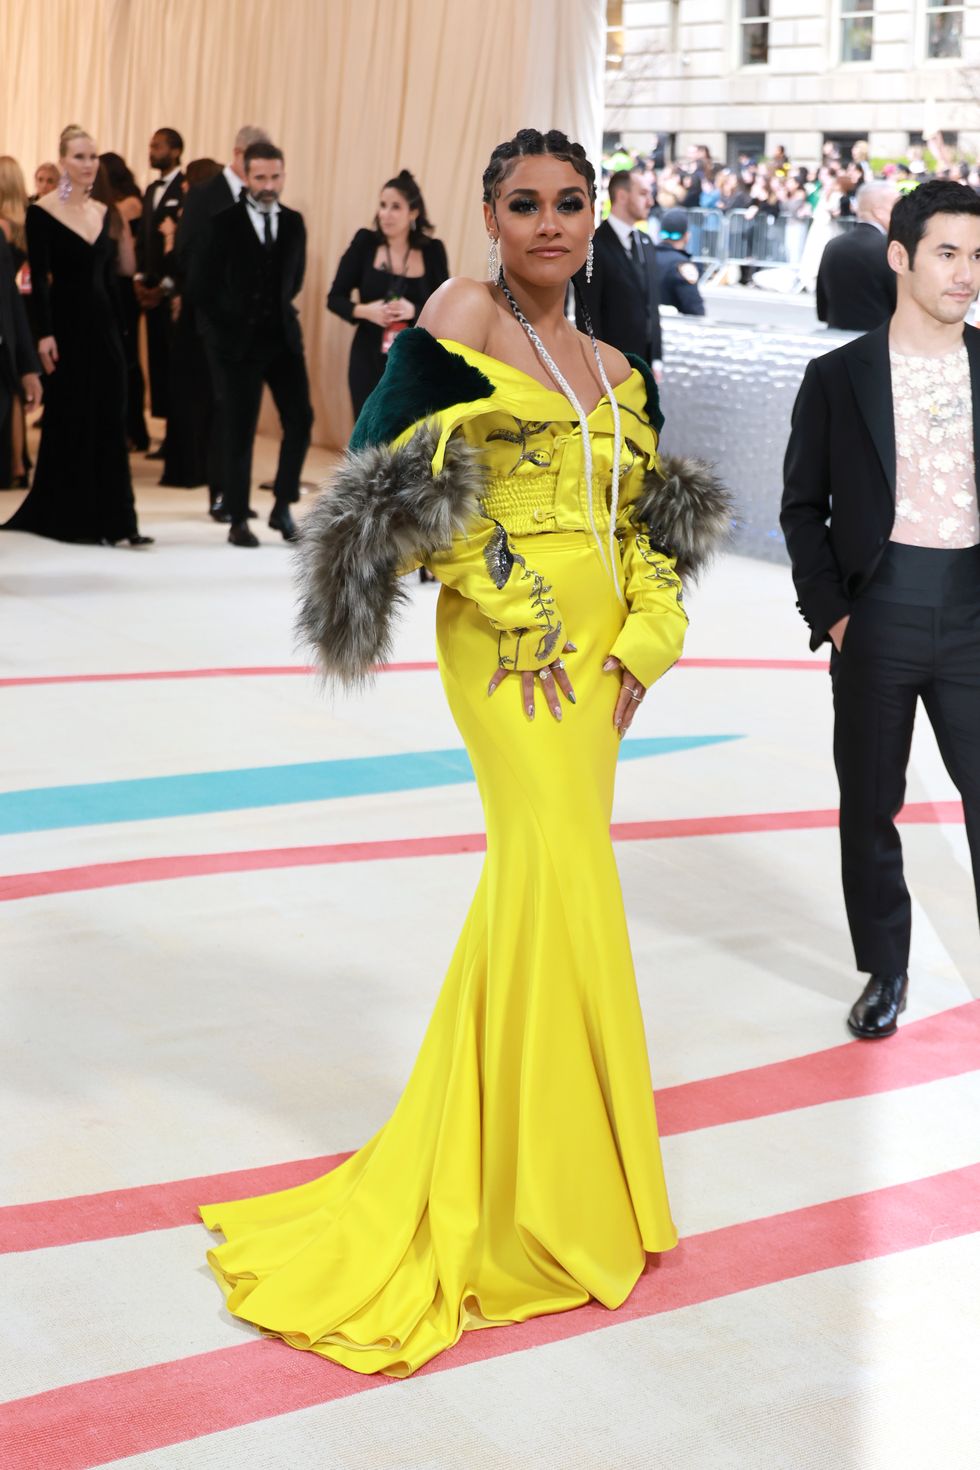 Met Gala 2023 red carpet live: Best, worst and wildest dressed